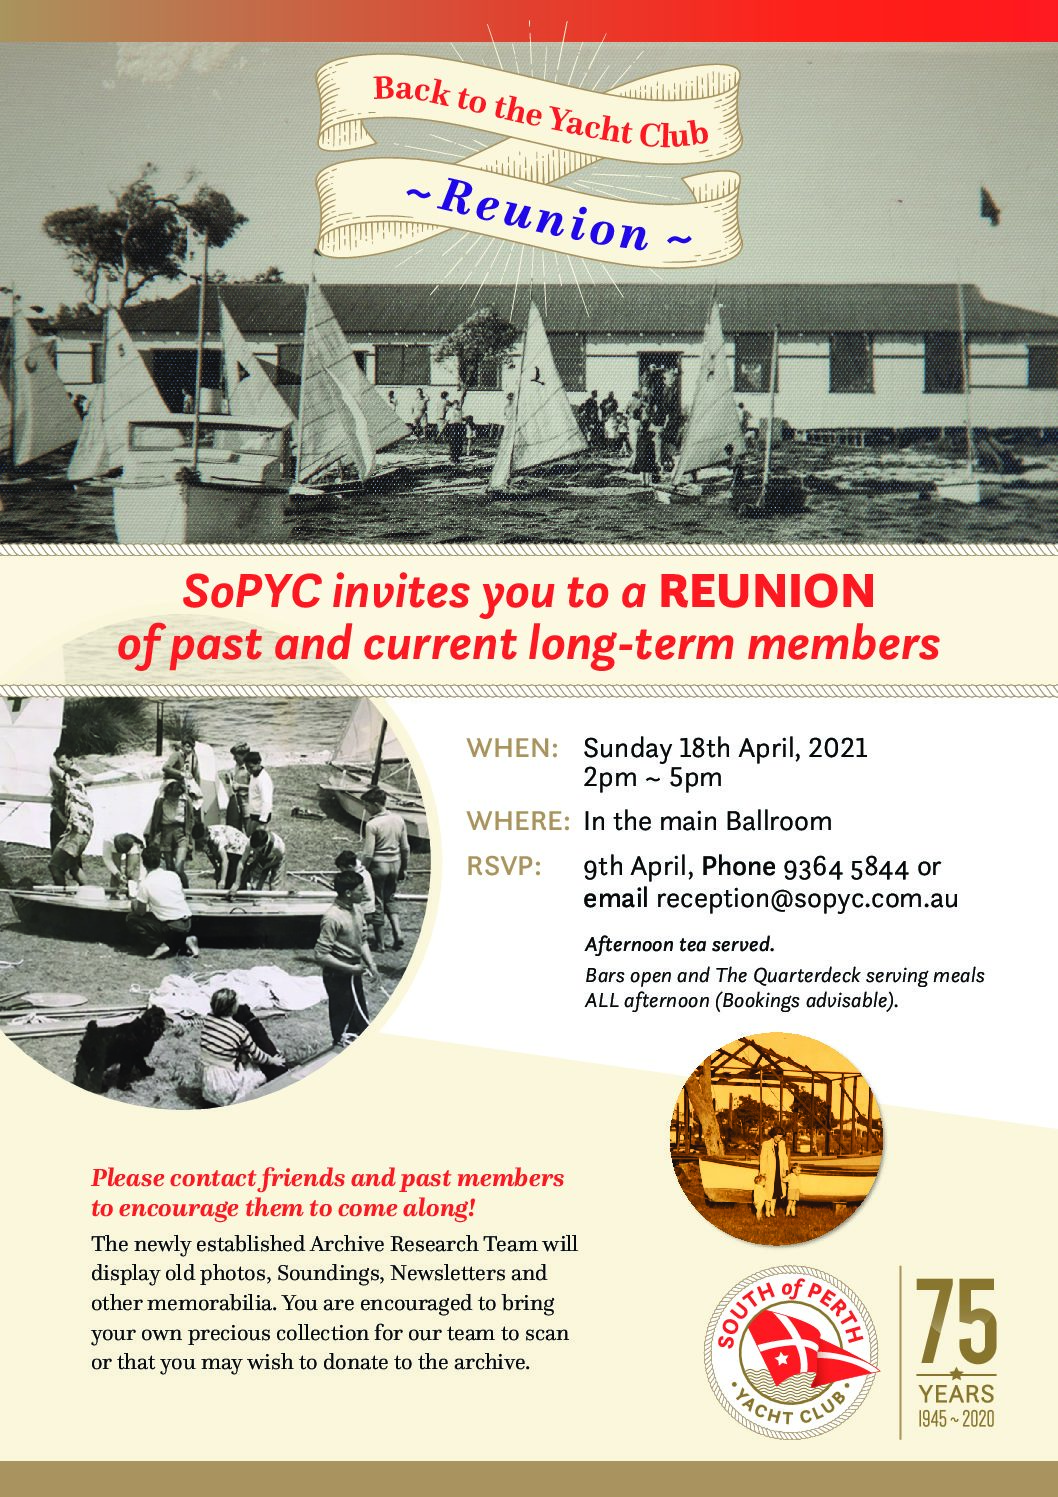 SoPYC 75 years Reunion - RSVP is essential. Book now!